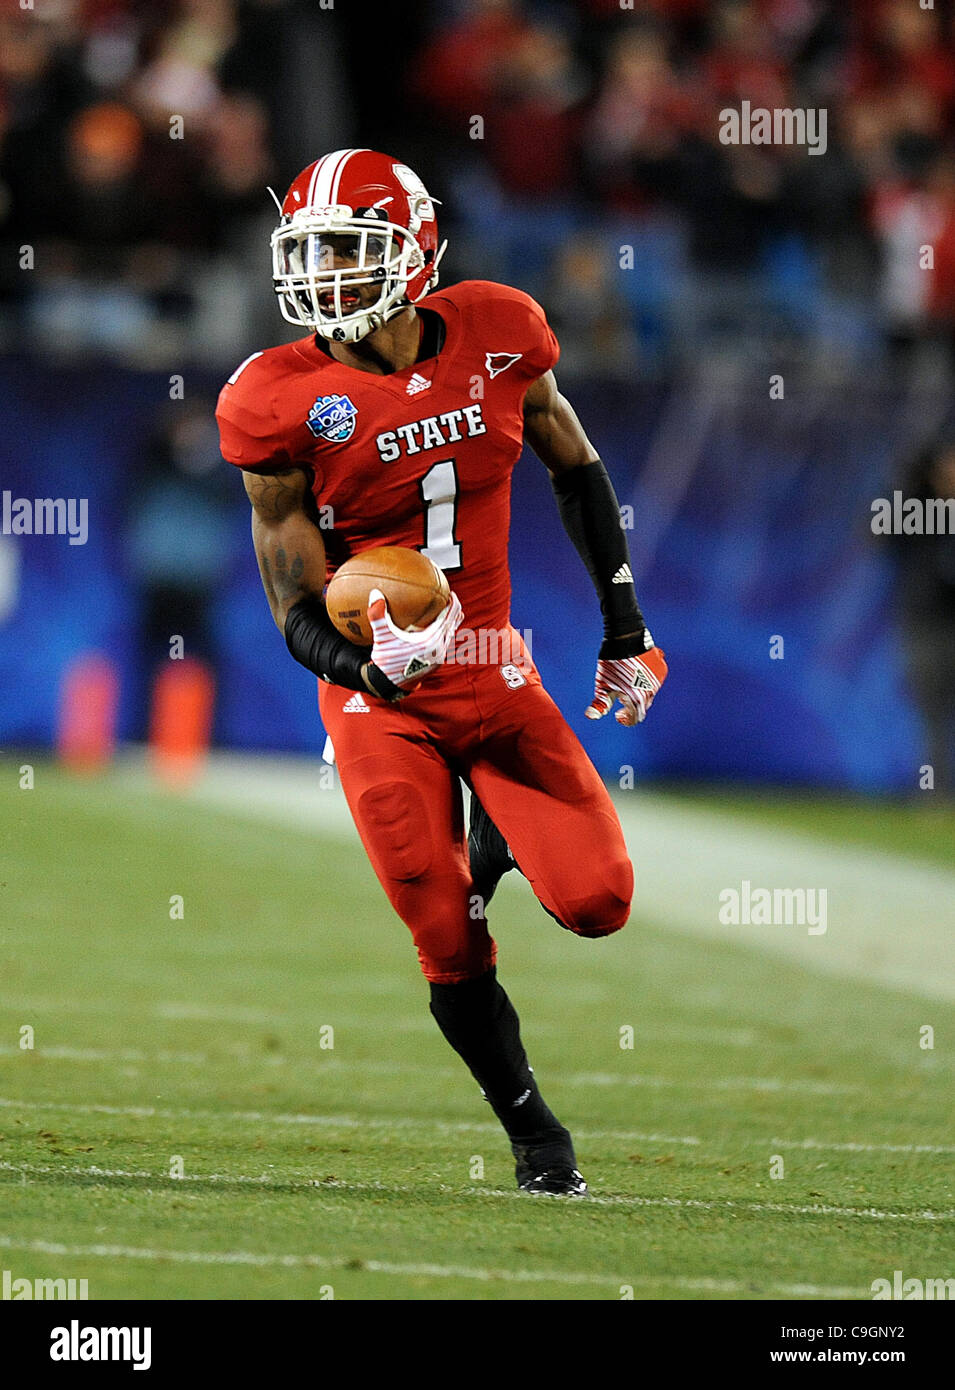 Dec.27, 2011 - Charlotte, North Carolina; USA -  North Carolina State Wolfpack (1) DAVID AMERSON runs for a touchdown as the North Carolina State Wolfpack compete against The University of Louisville Cardinals in the Belk Bowl College Football game that took place at the Bank of America Stadium.  Co Stock Photo